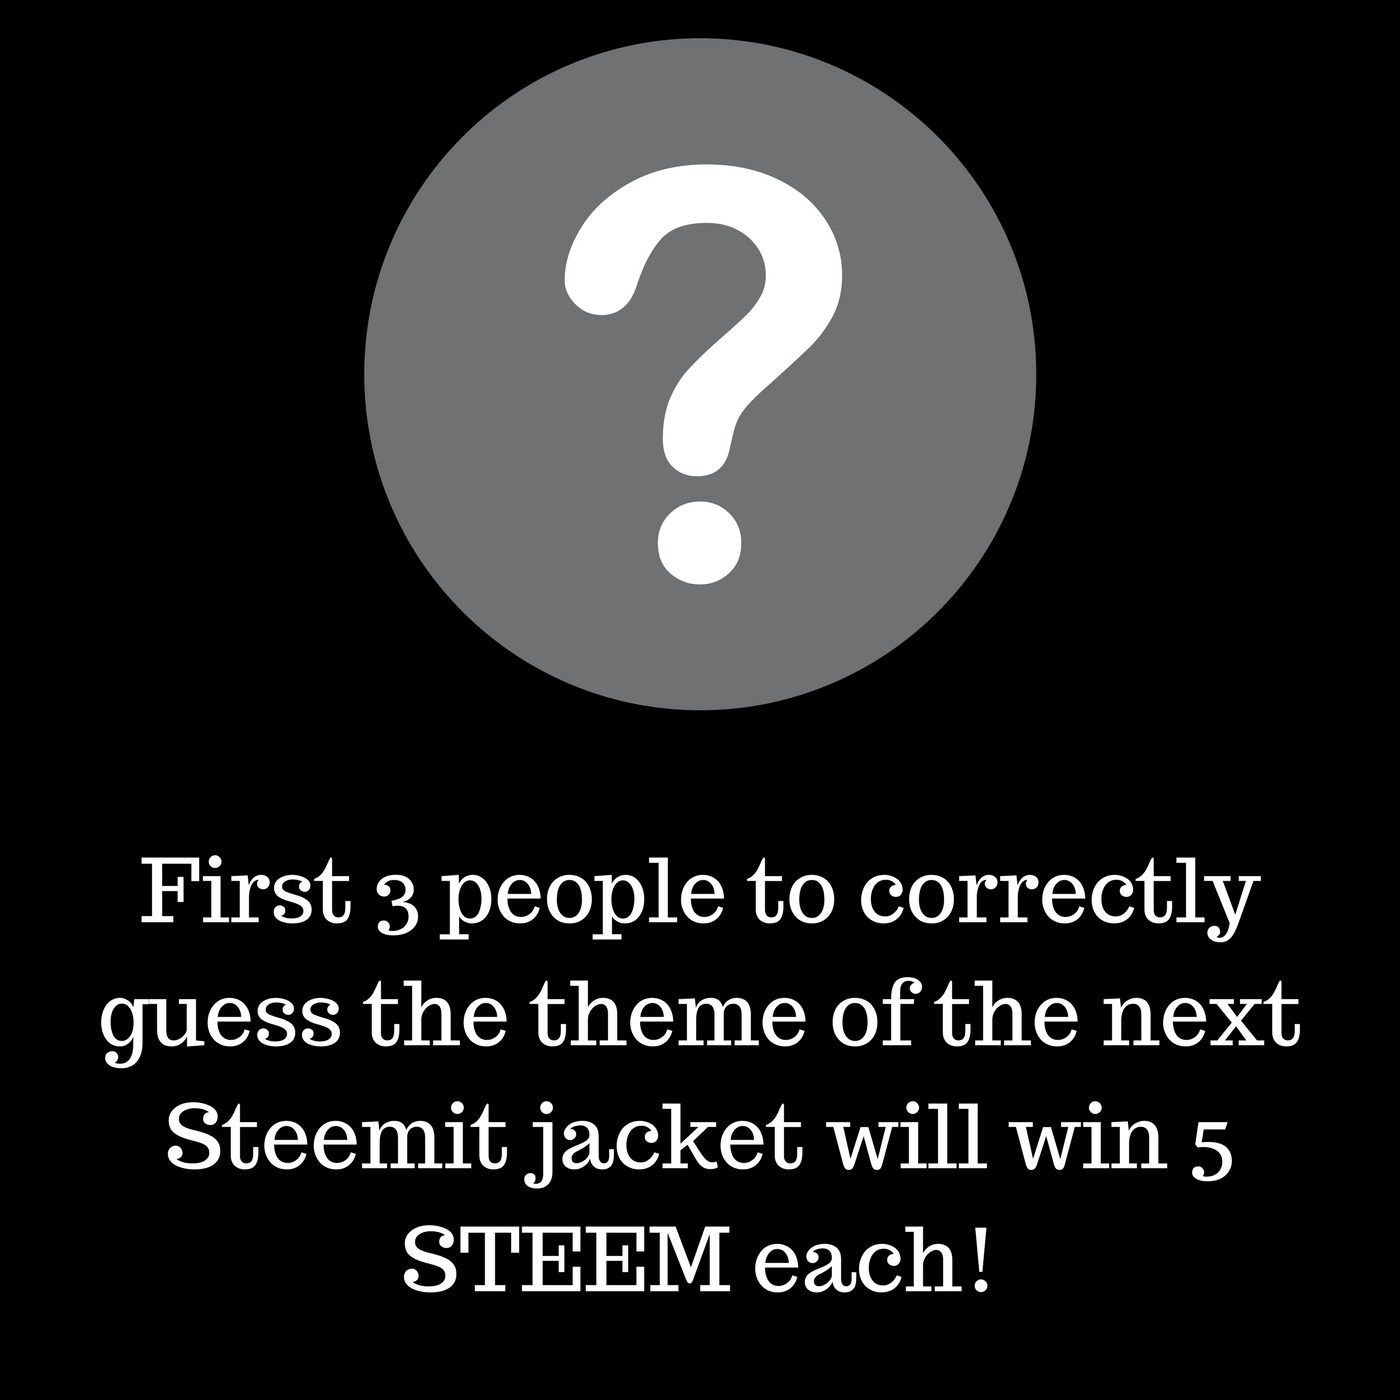 First 3 people to correctly guess the theme of the next Steemit jacket will win 5 STEEM each!.jpg